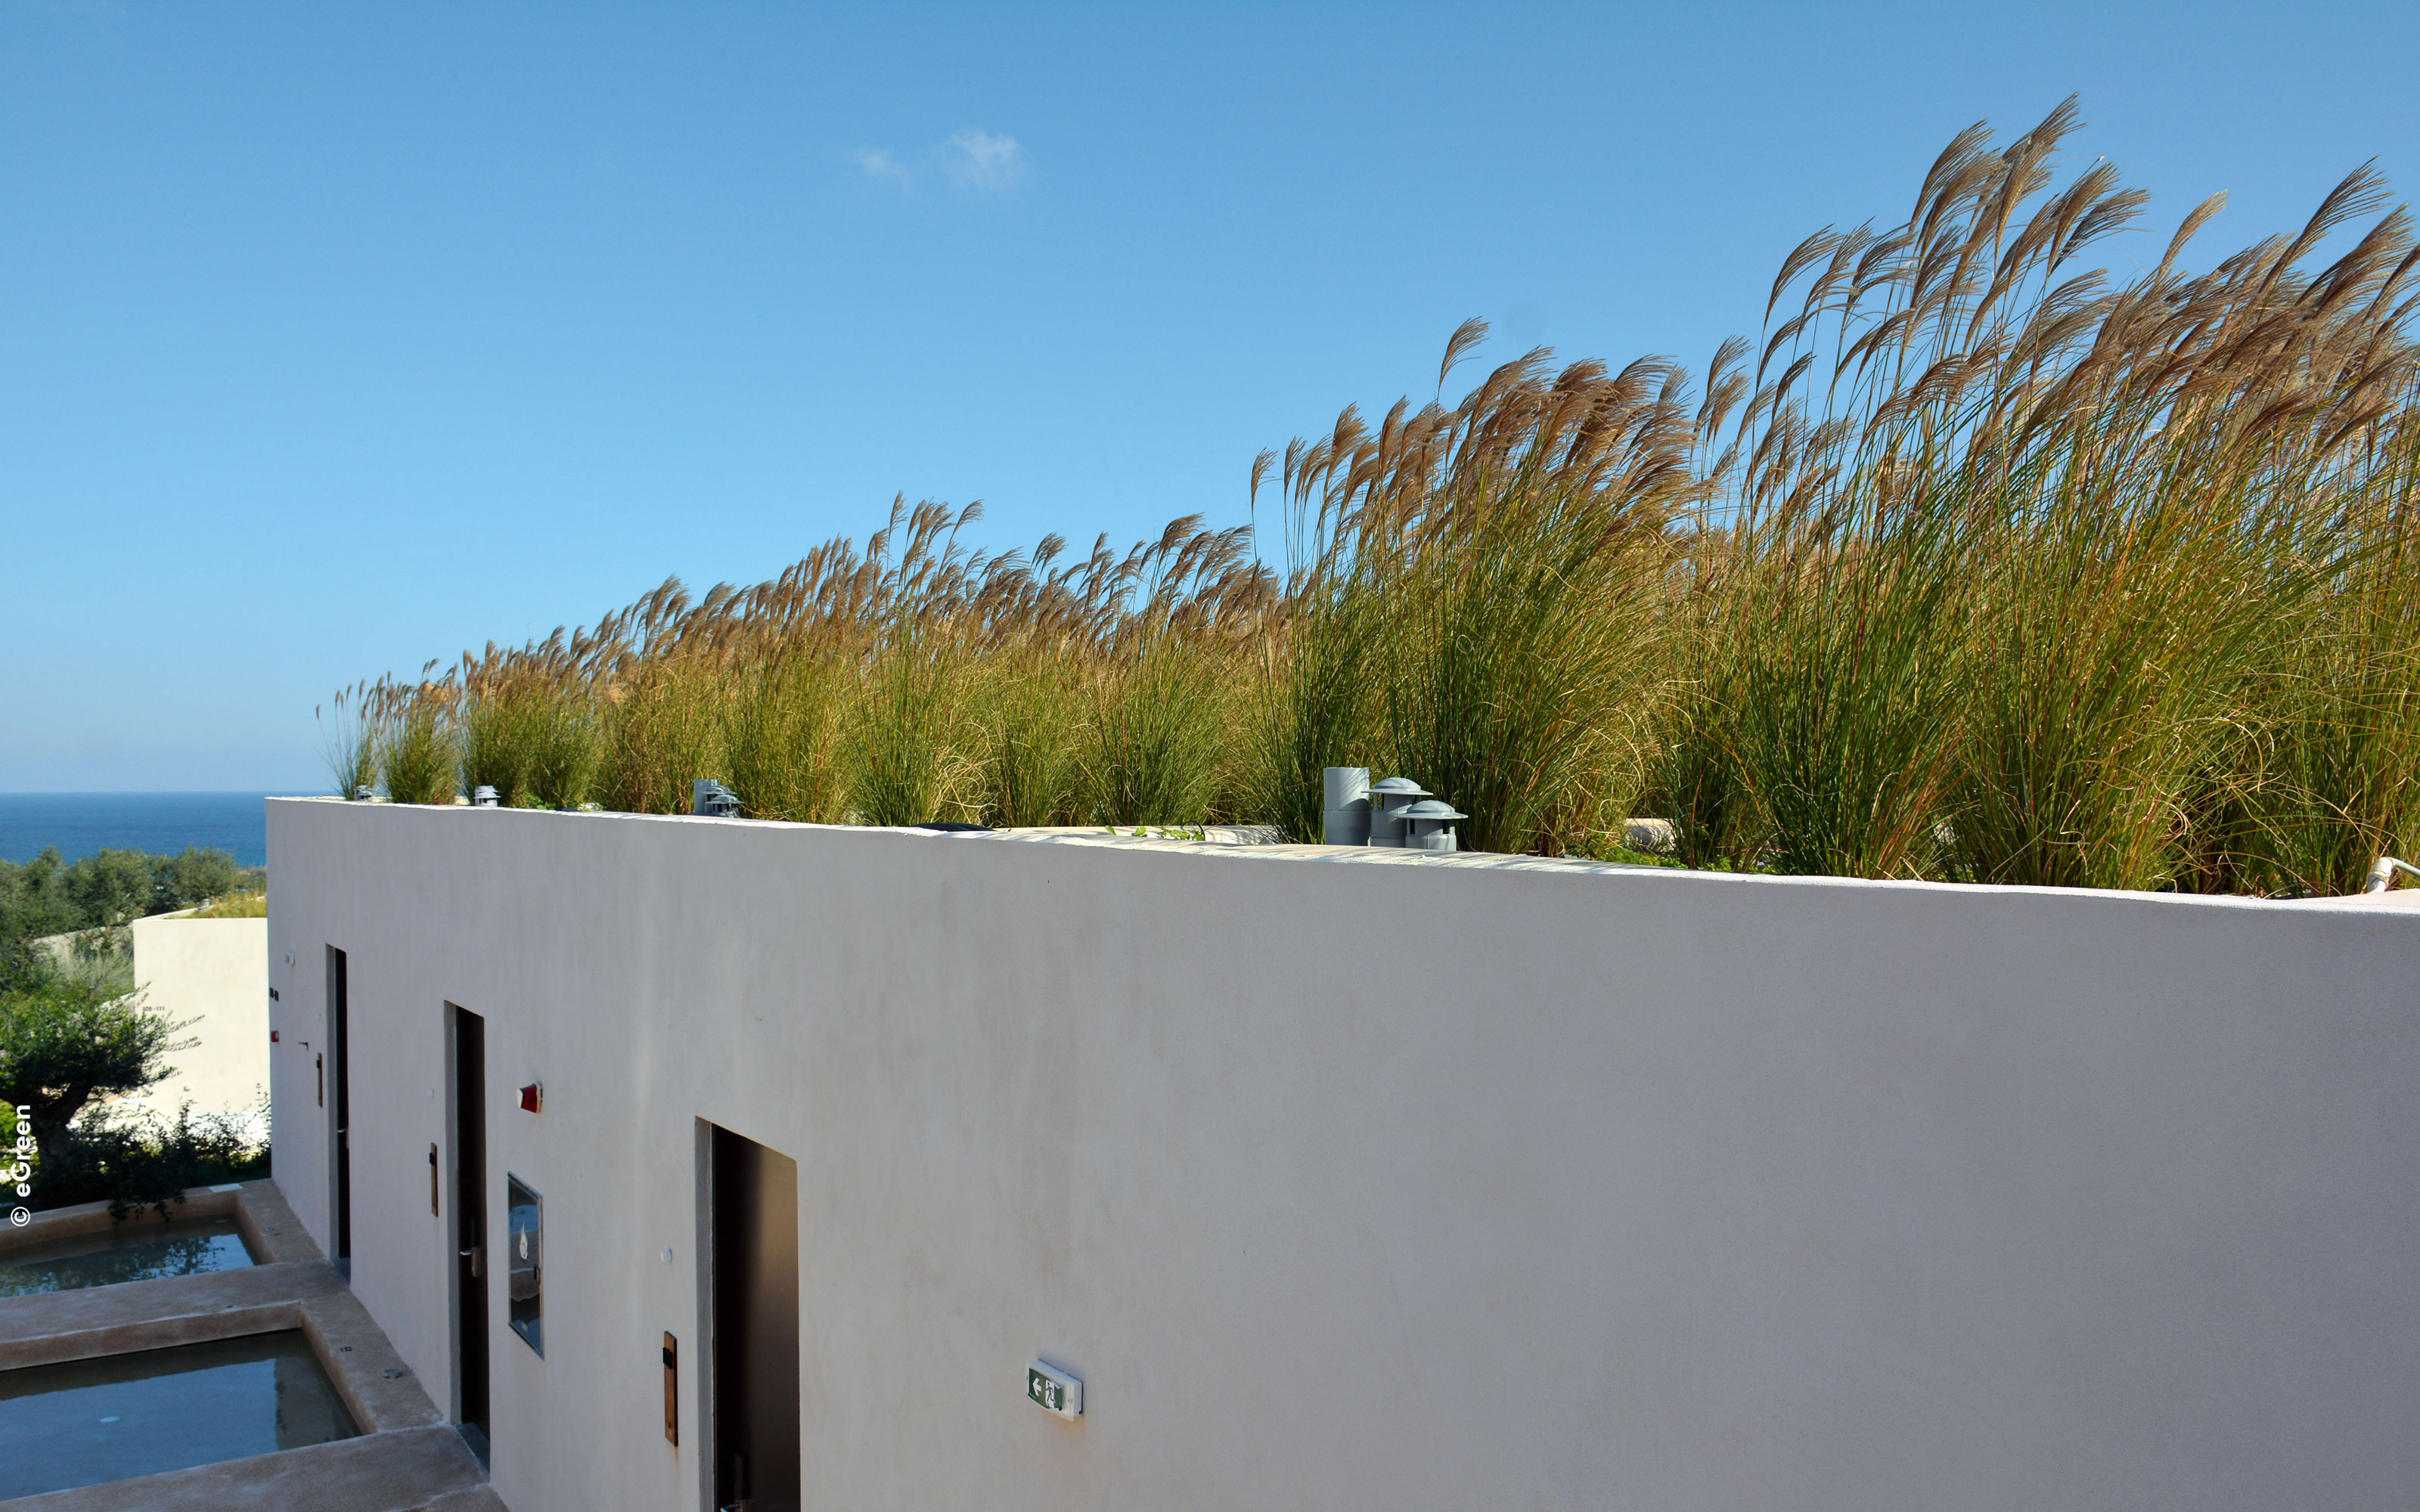 Ornamental grasses on a rooftop